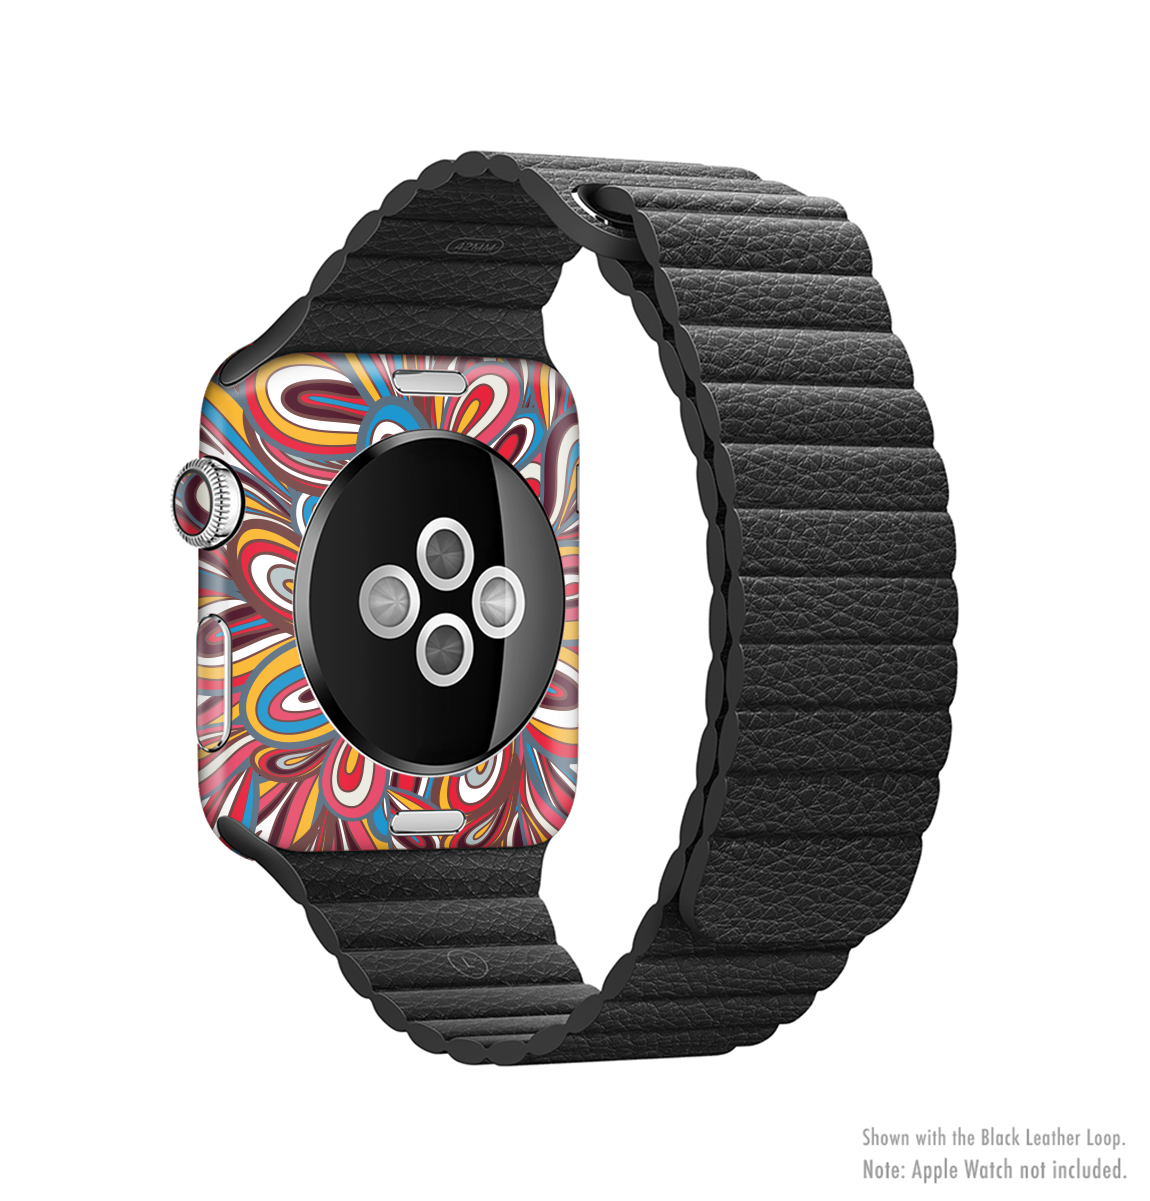 The Color Floral Sprout Full-Body Skin Kit for the Apple Watch